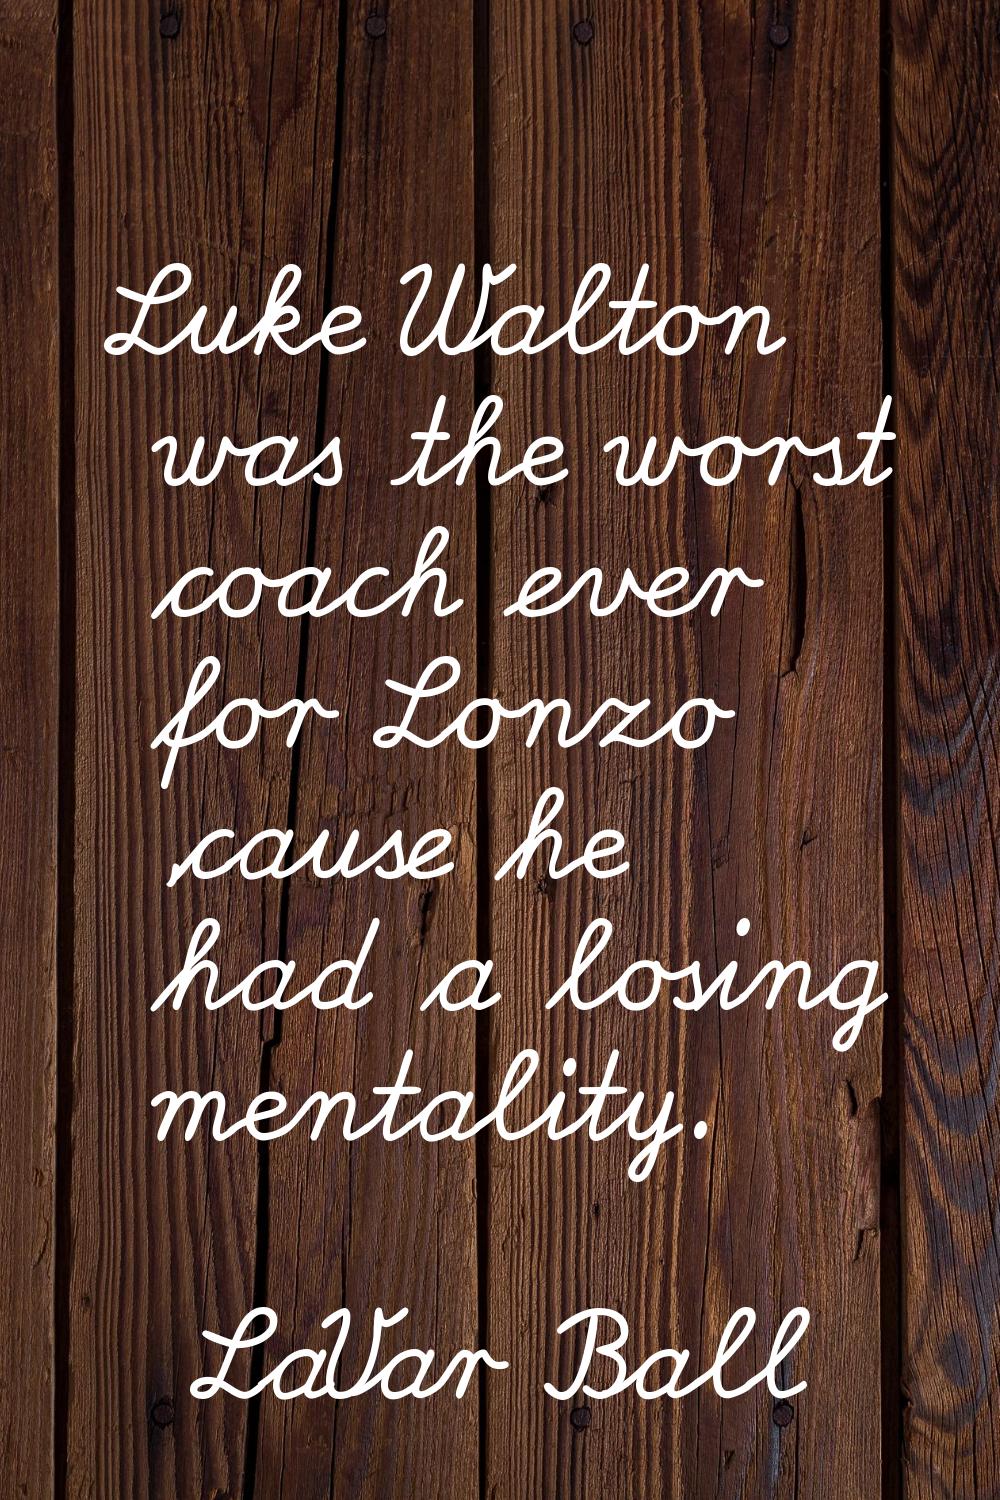 Luke Walton was the worst coach ever for Lonzo 'cause he had a losing mentality.